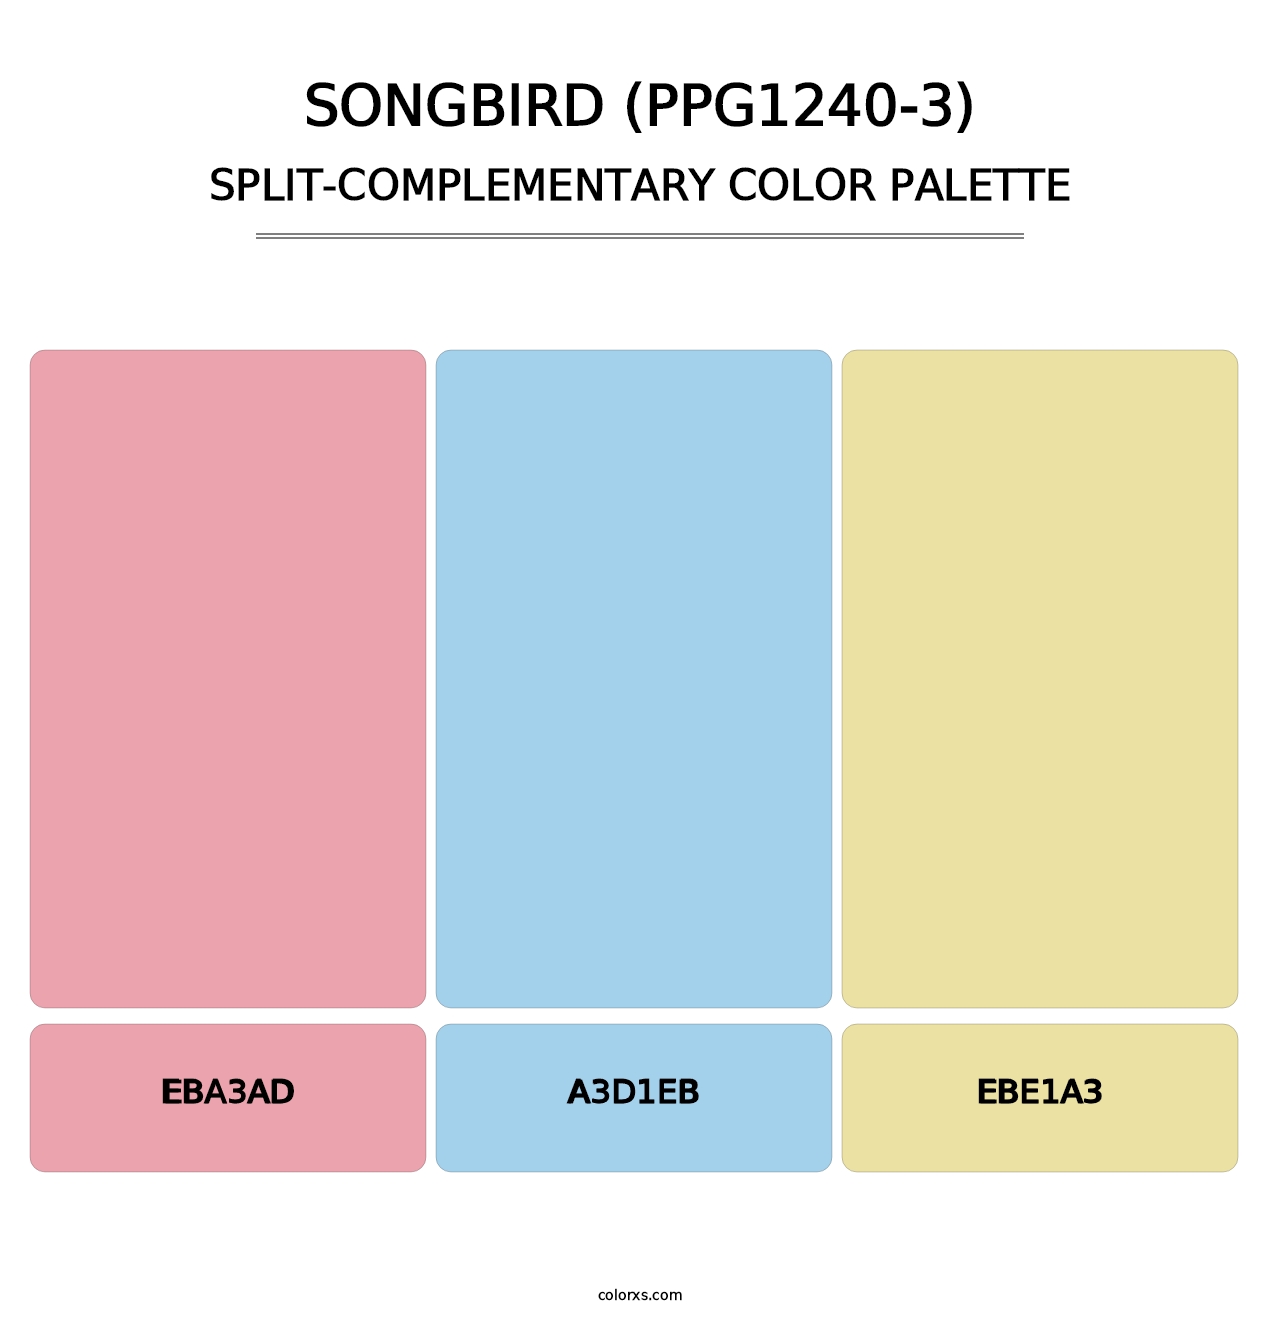 Songbird (PPG1240-3) - Split-Complementary Color Palette